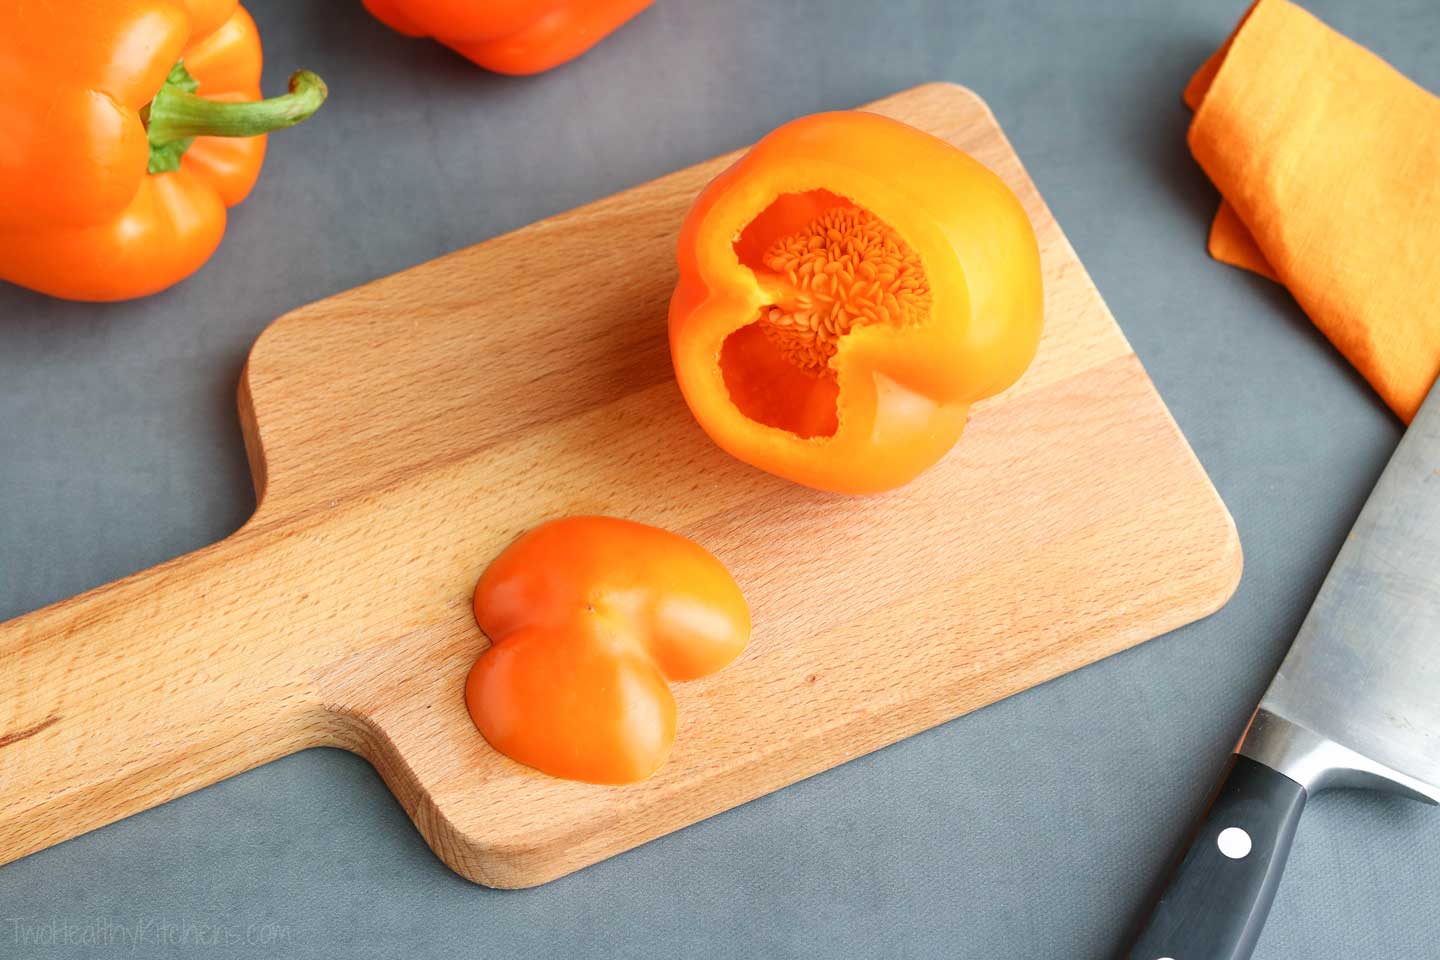 If your pepper is the right shape, all you have to do to form the body of your Spooky Spider, is simply cut the bottom off the bell pepper!